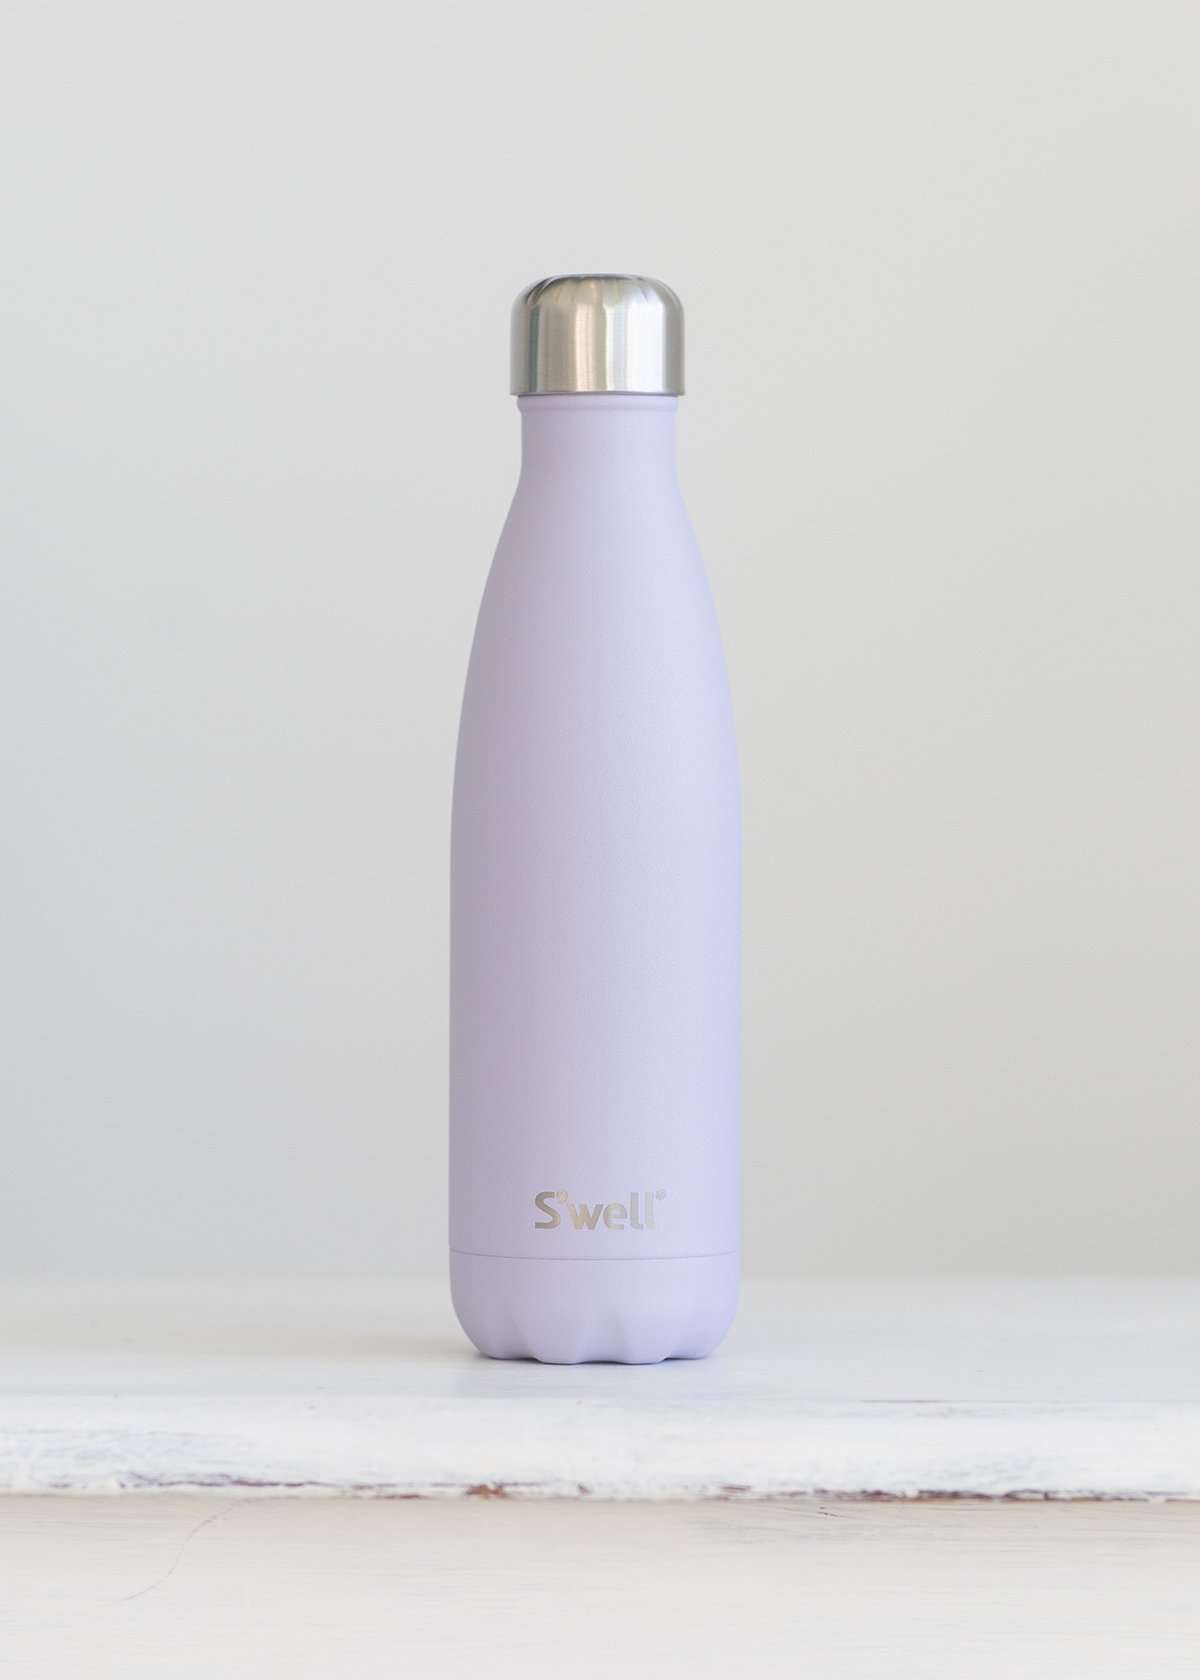 S'well water bottle in a purple garnet design and holds 16 oz.